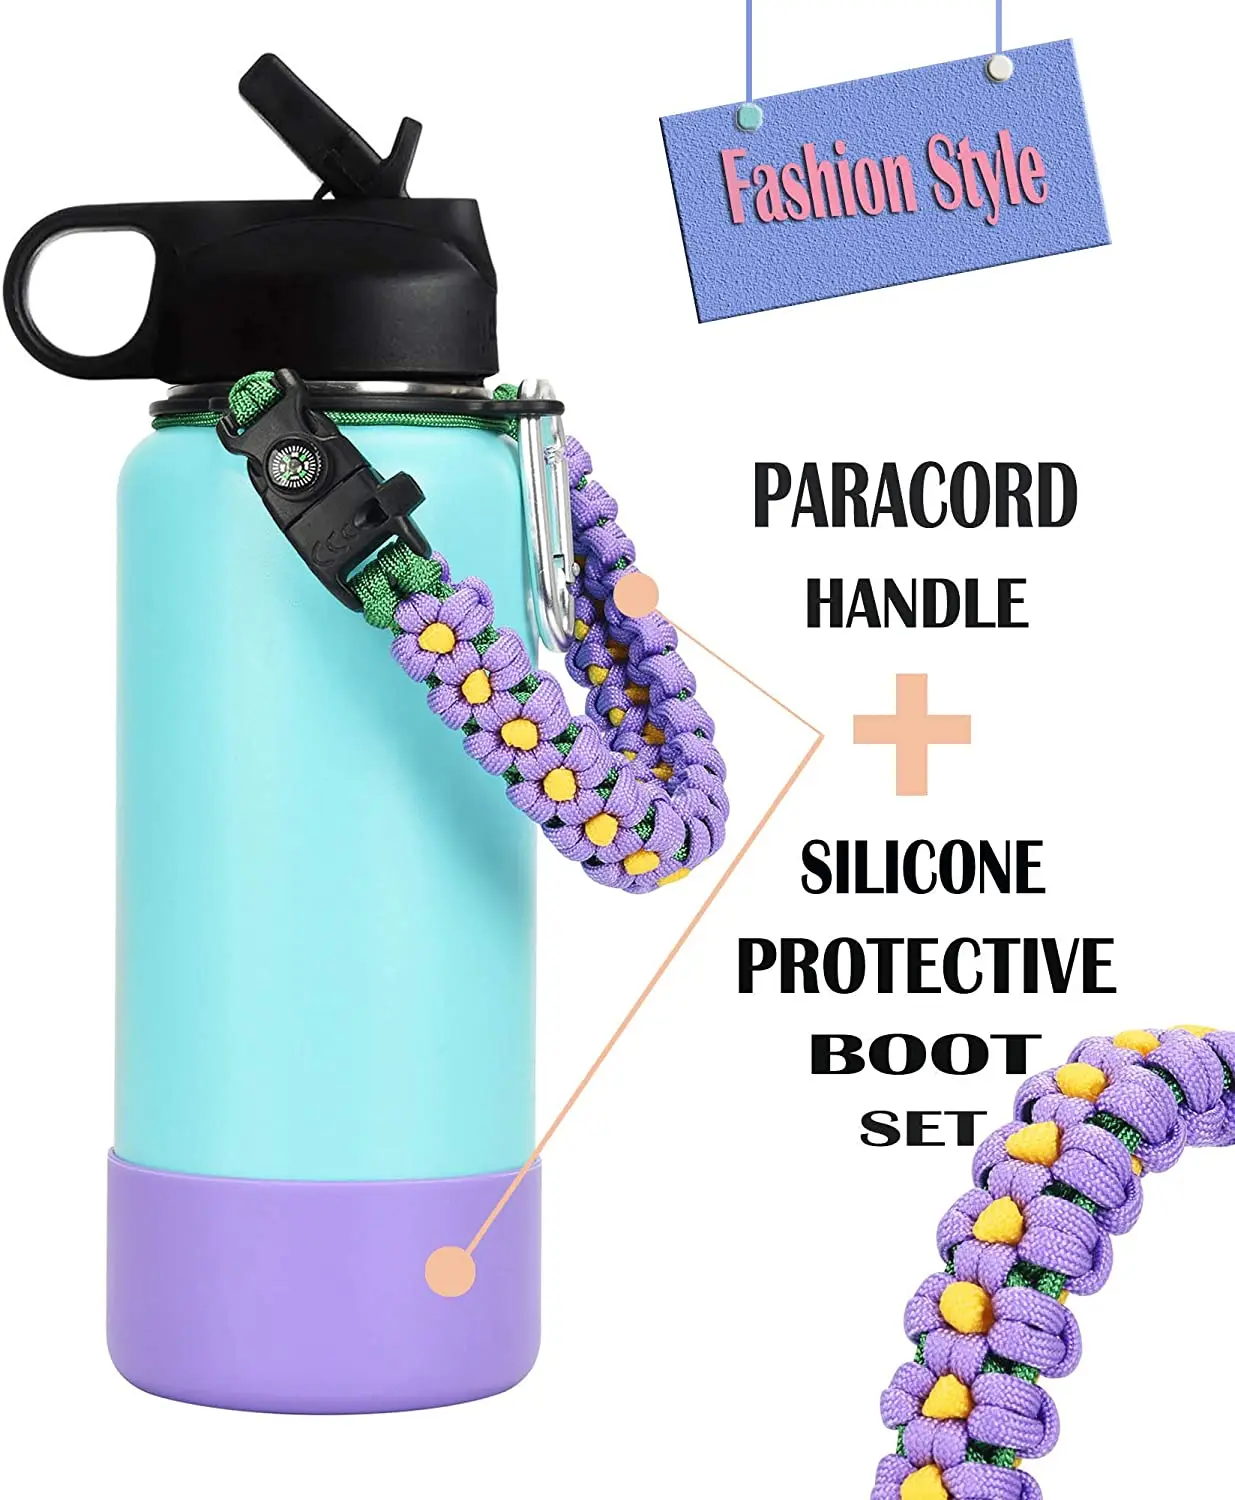 https://ae01.alicdn.com/kf/S727f36ac36a845c1a38f92412eebf941B/HKNA-Paracord-Handle-and-Silicone-Bootie-Compatible-Hydro-Flask-Wide-Mouth-Water-Bottle-with-Compass-Whistle.jpg